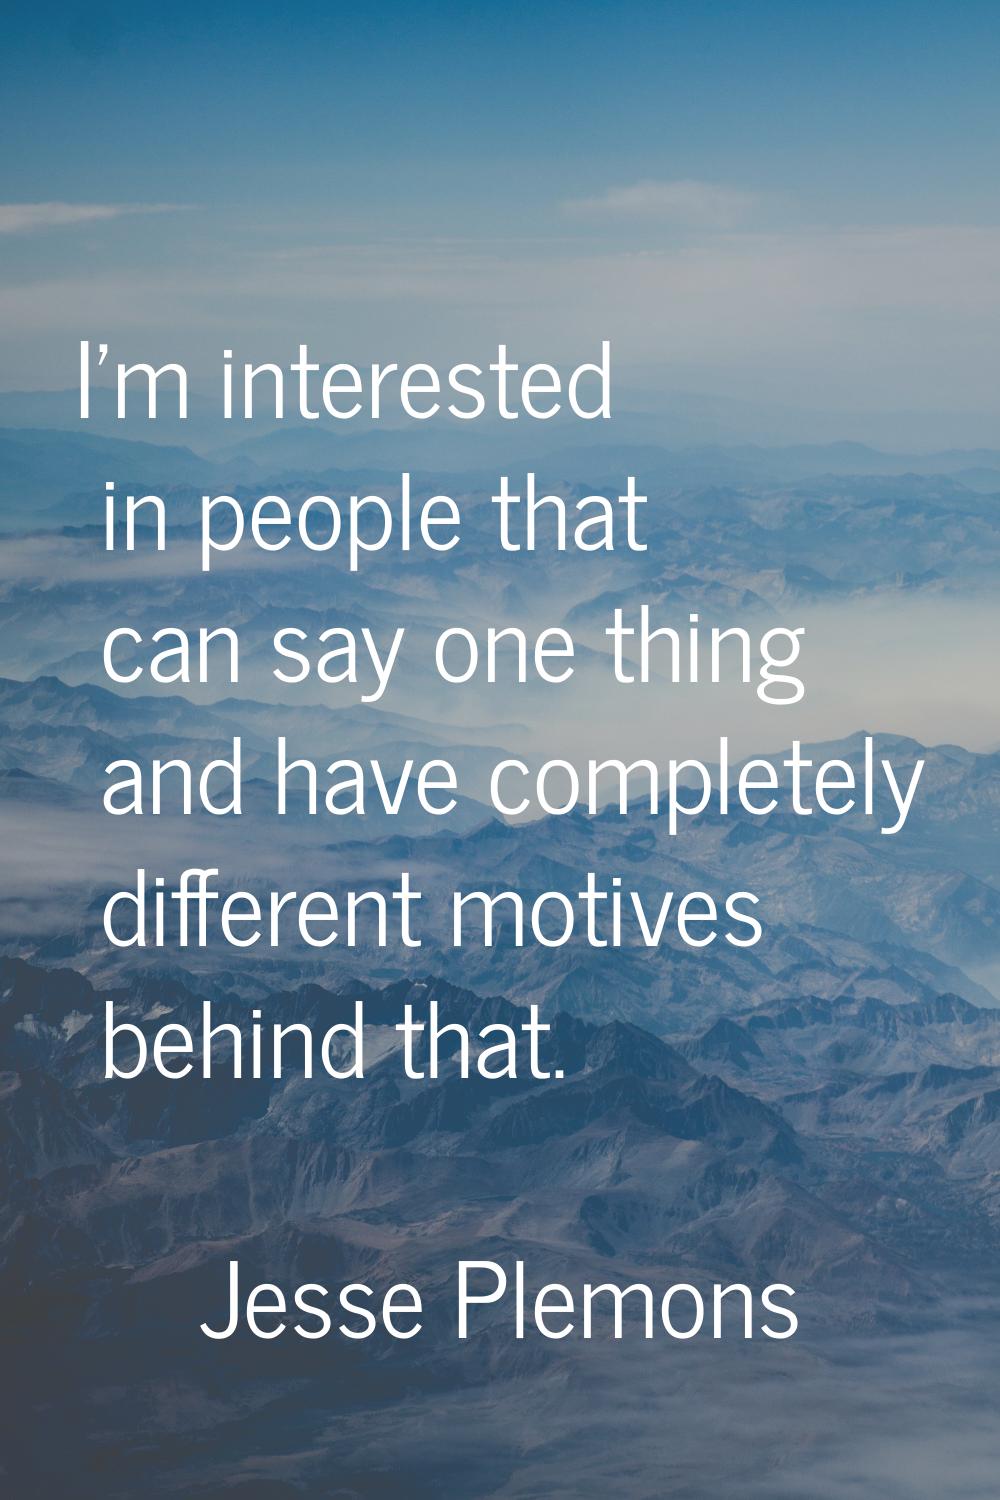 I'm interested in people that can say one thing and have completely different motives behind that.